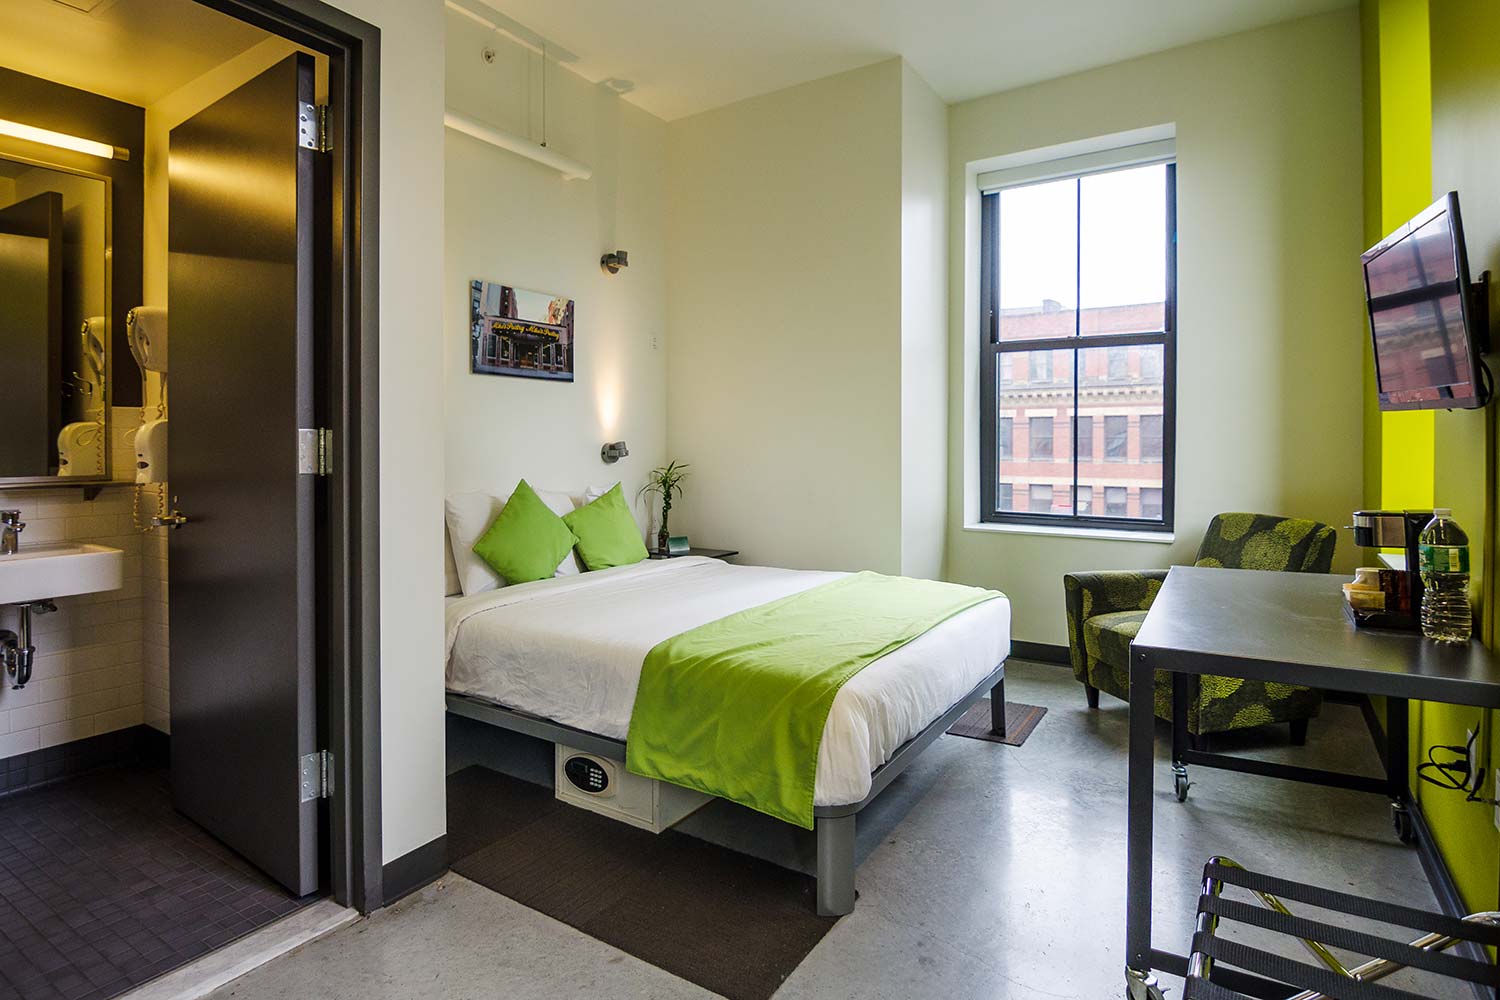 a private room at HI Boston hostel sleeps up to two people in a queen-sized bed. Opposite the bed, there is a small desk and a wall-mounted TV. Through an open door inside the room, a private ensuite bathroom is visible.